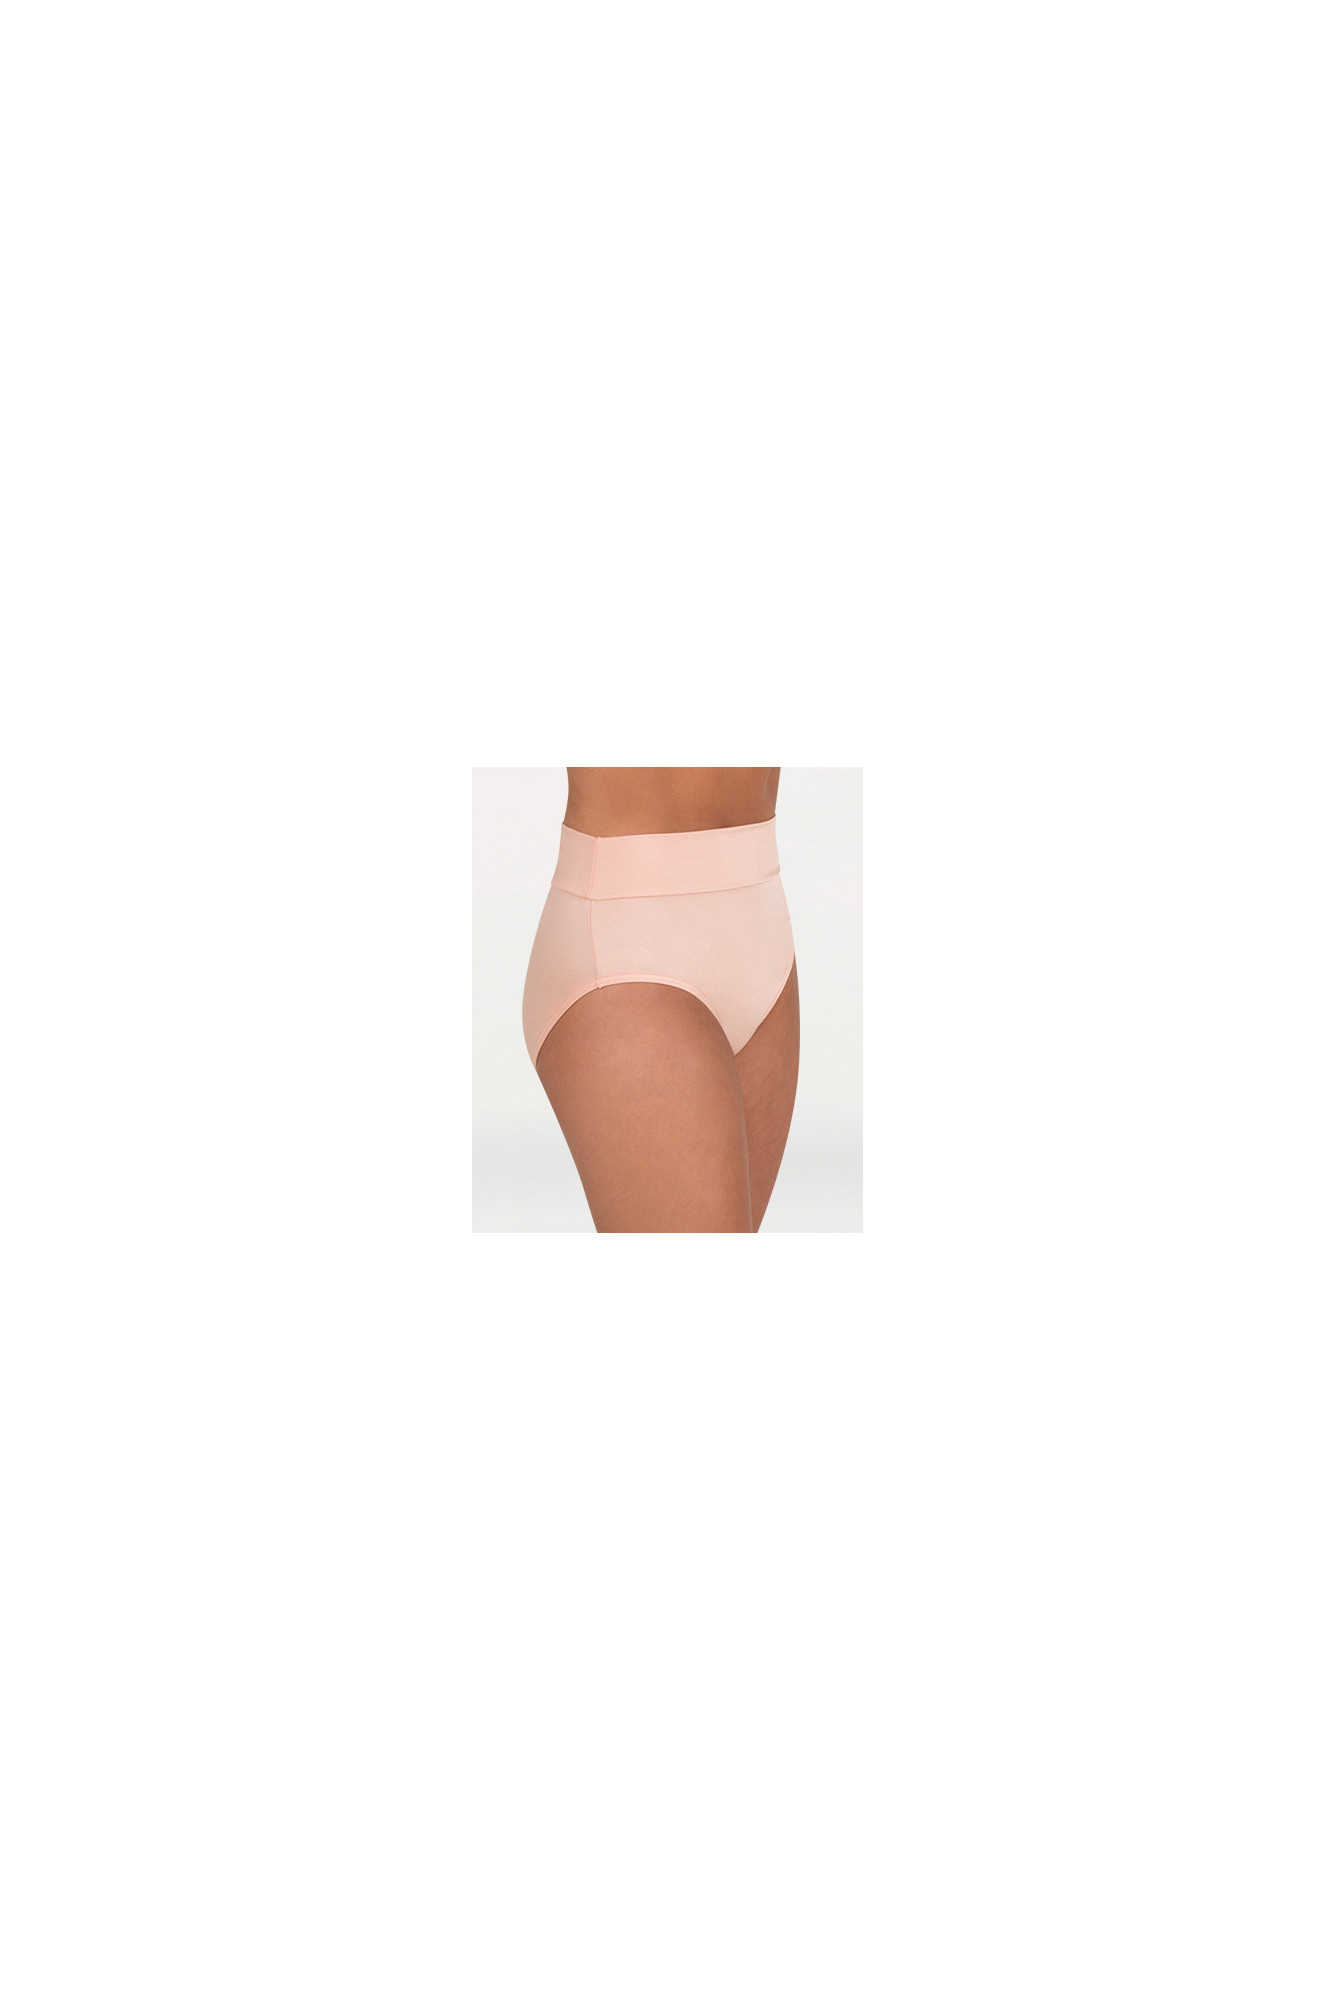 Culotte Body Wrappers NL294 blush